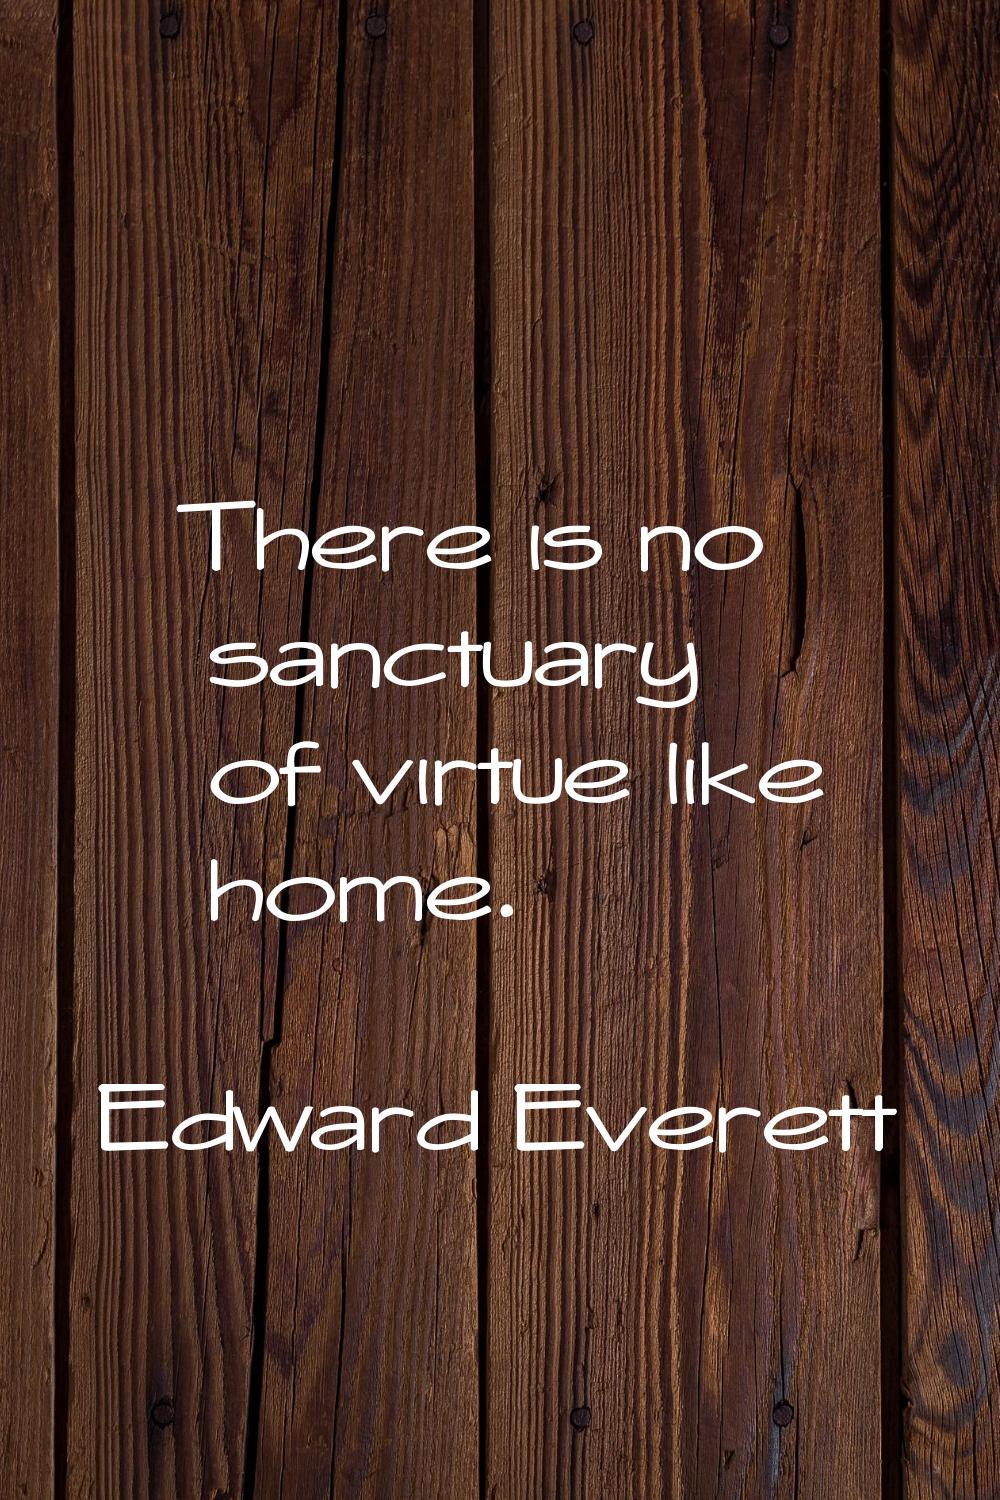 There is no sanctuary of virtue like home.